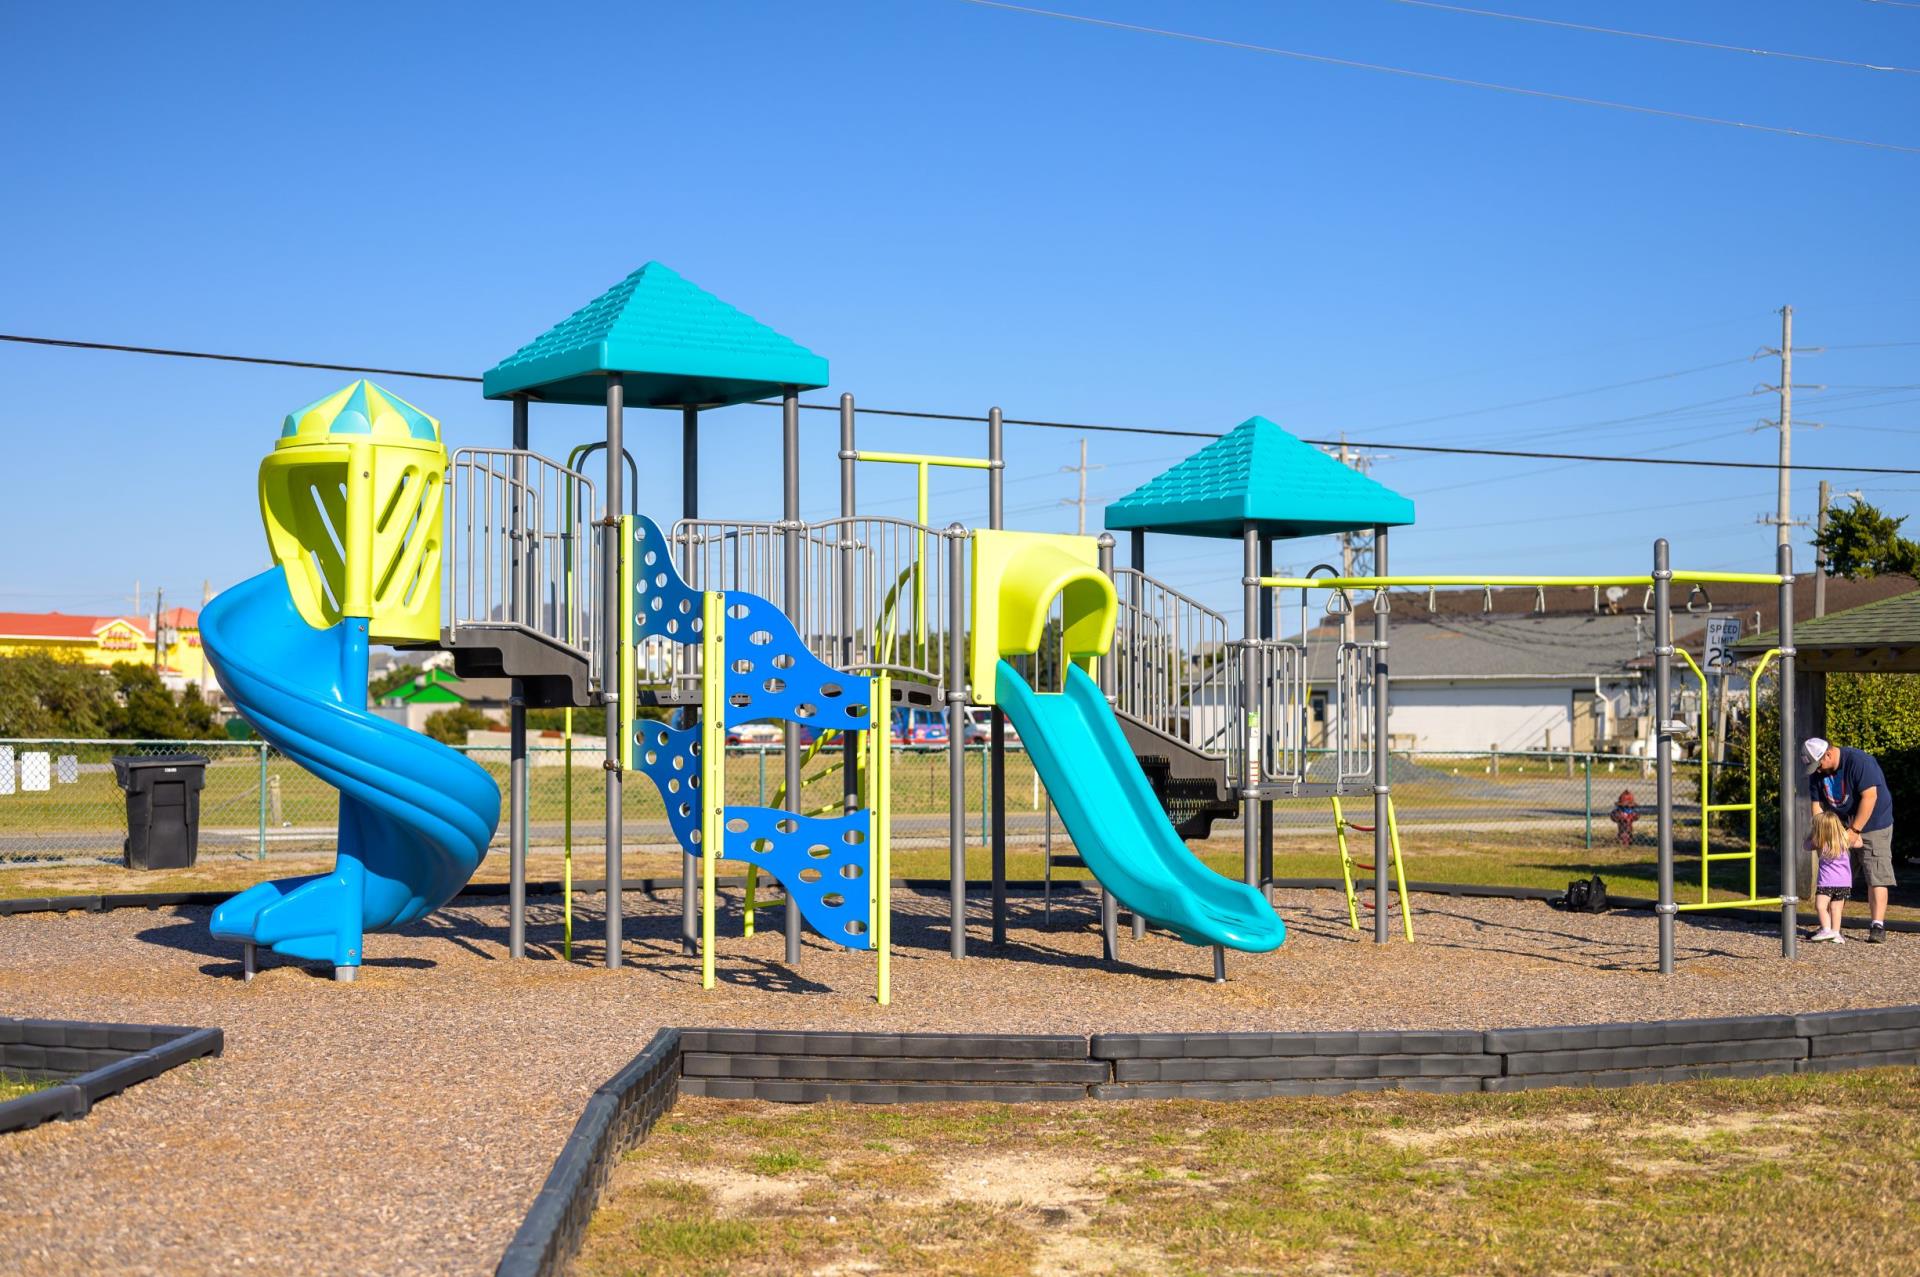 Image of a colorful playground containing slides and climbing areas.